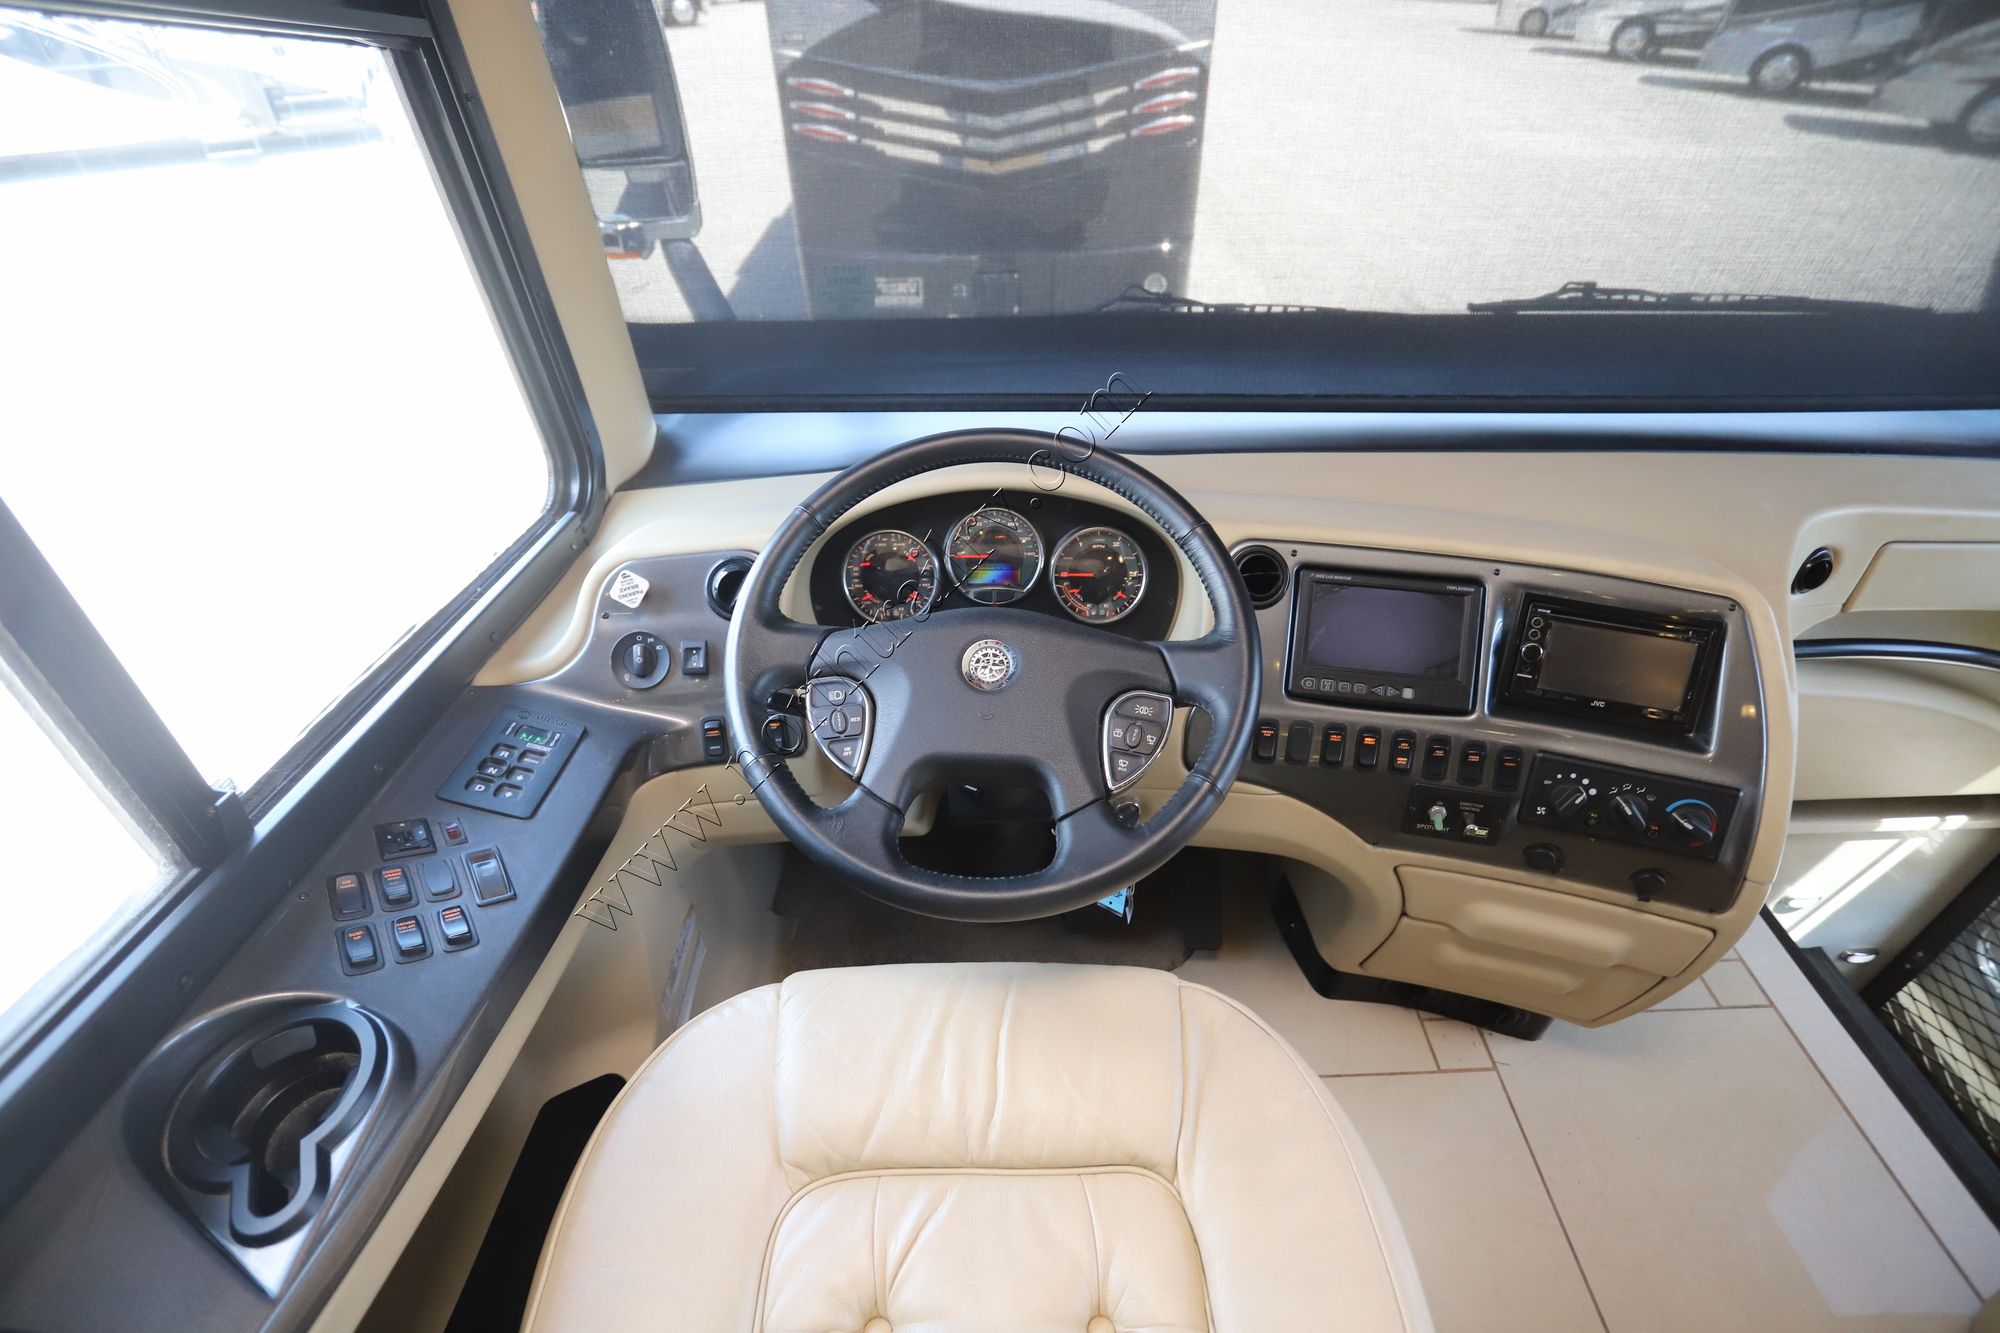 Used 2012 Tiffin Motor Homes Allegro Bus 40QBP Class A  For Sale